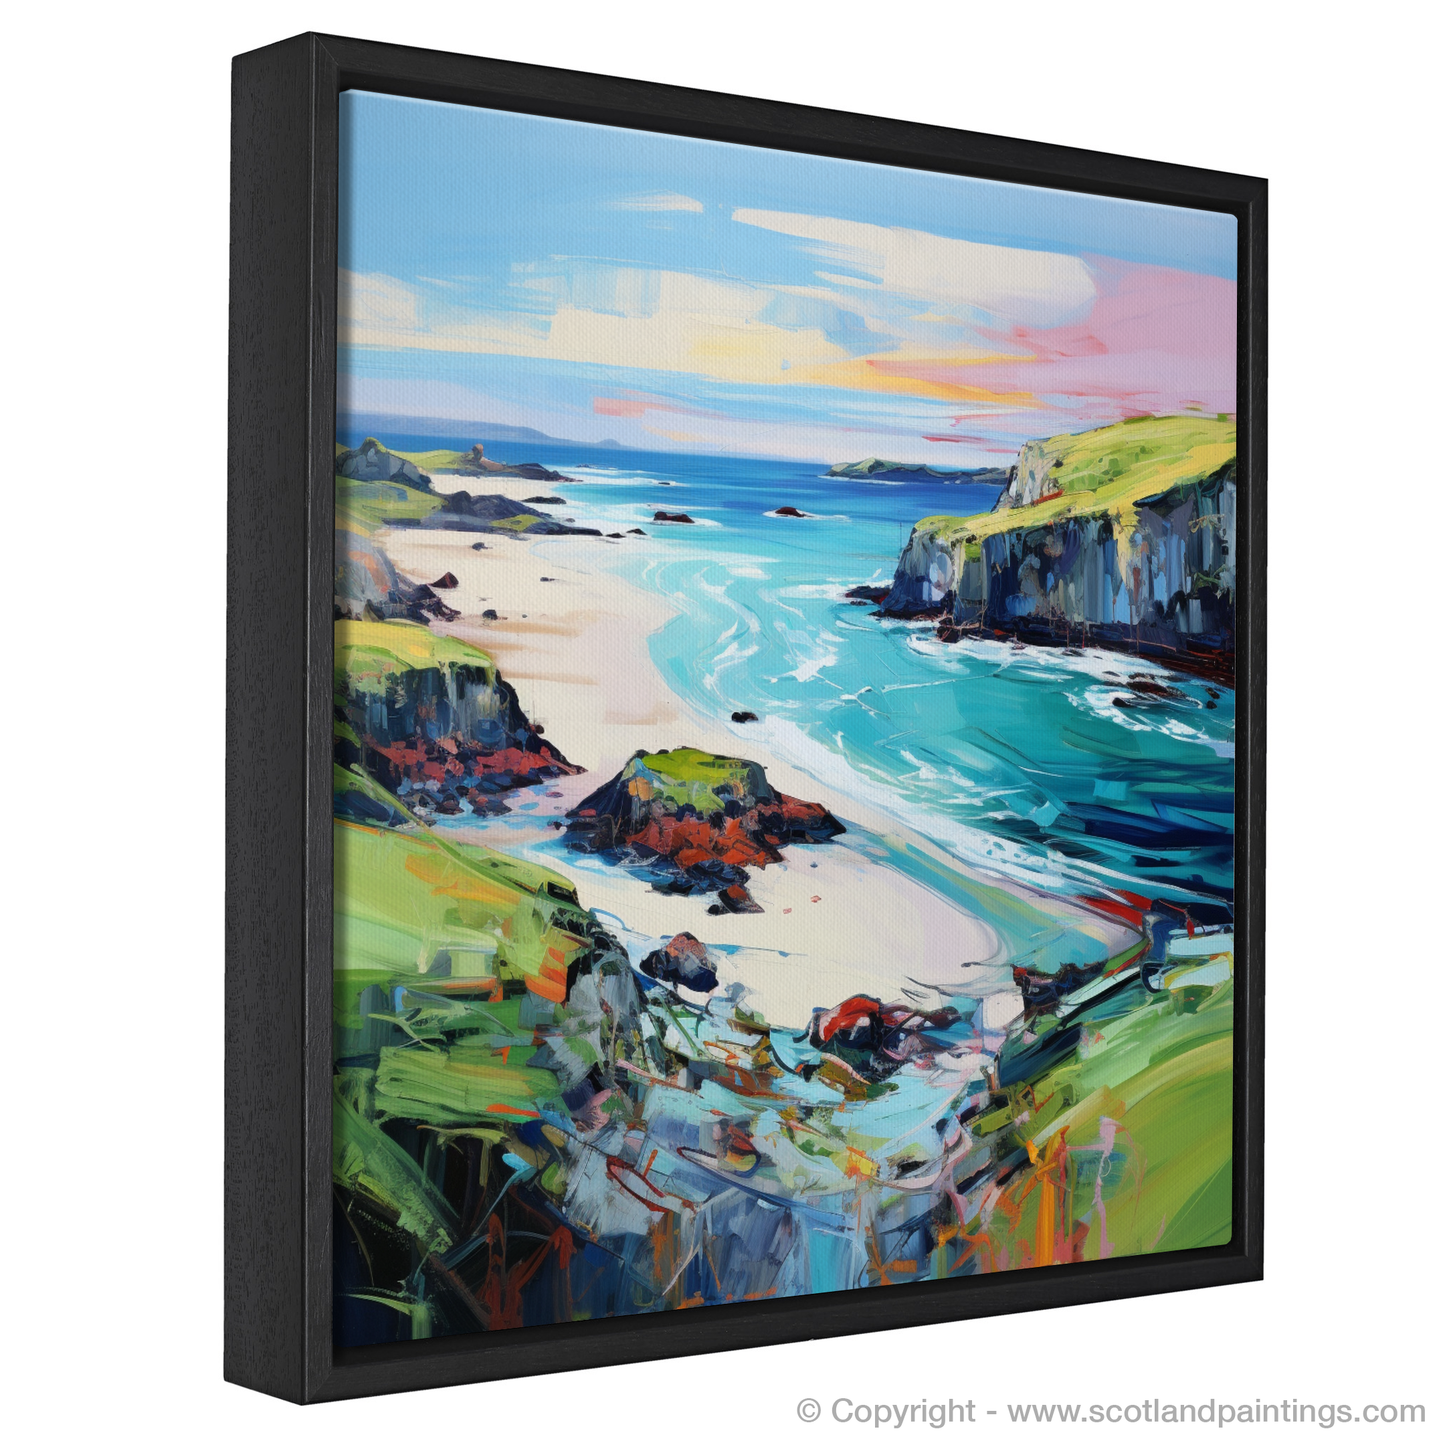 Painting and Art Print of Kiloran Bay, Isle of Colonsay entitled "Kiloran Bay Unleashed: An Expressionist Ode to Scottish Shores".